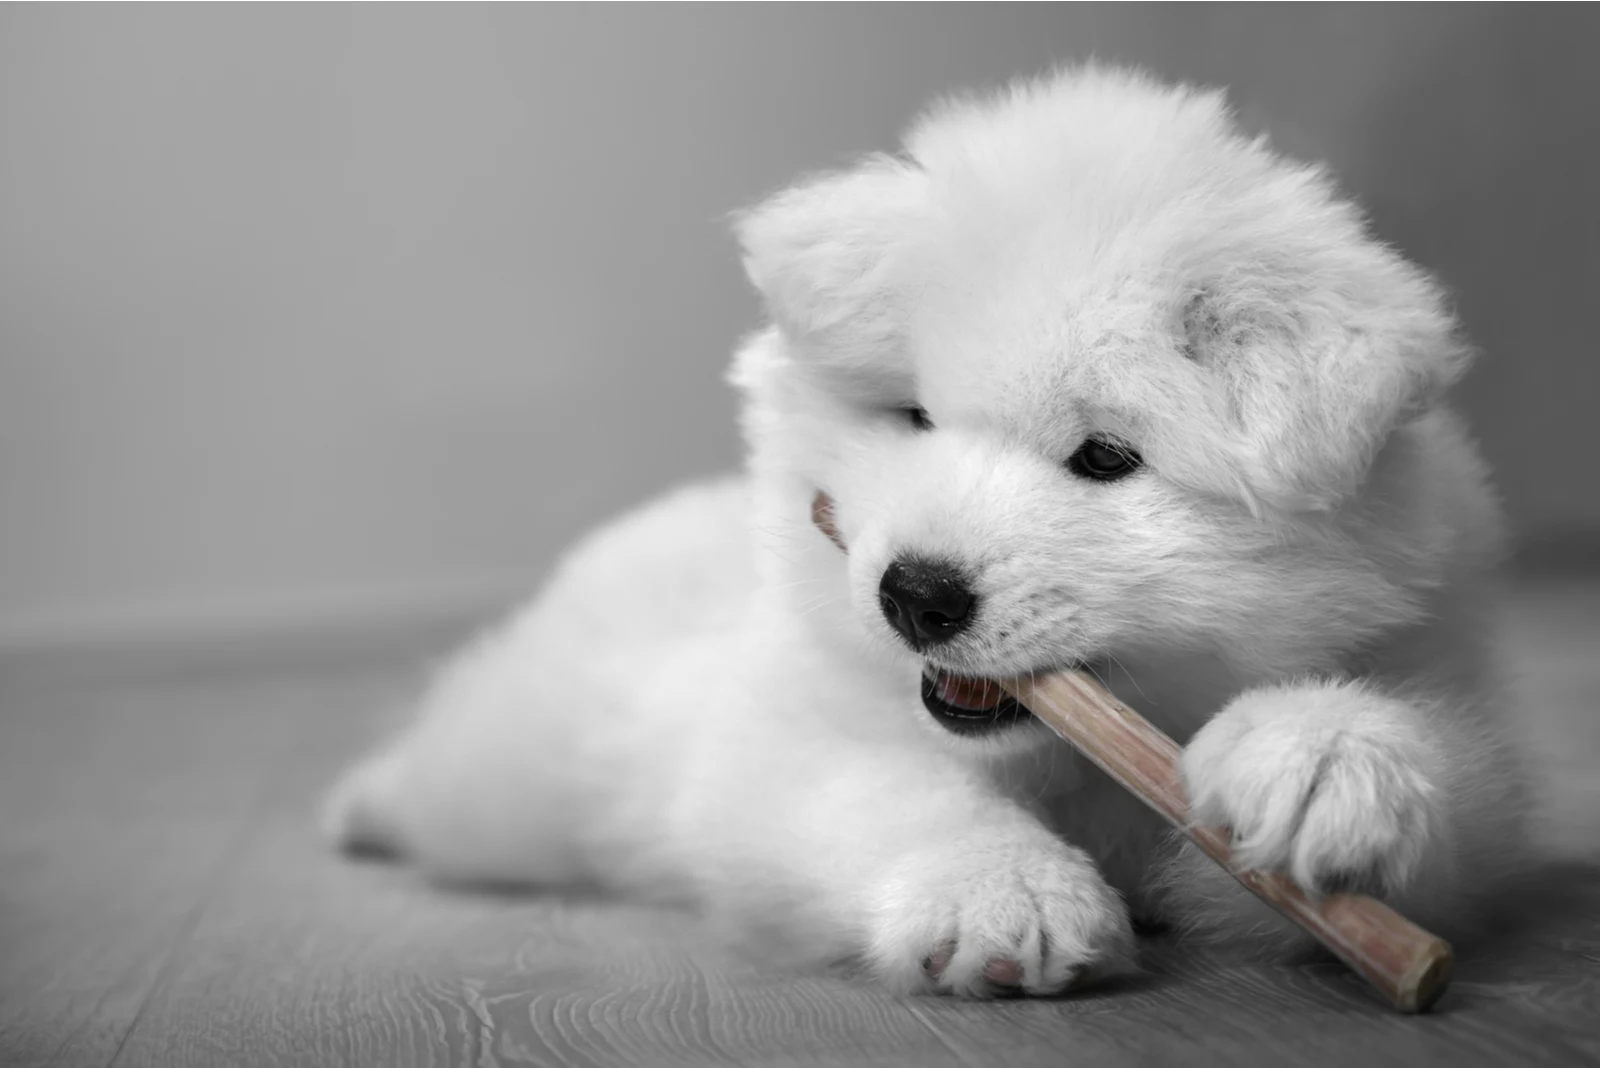 White fluffy puppy with black eyes nibbles a wand